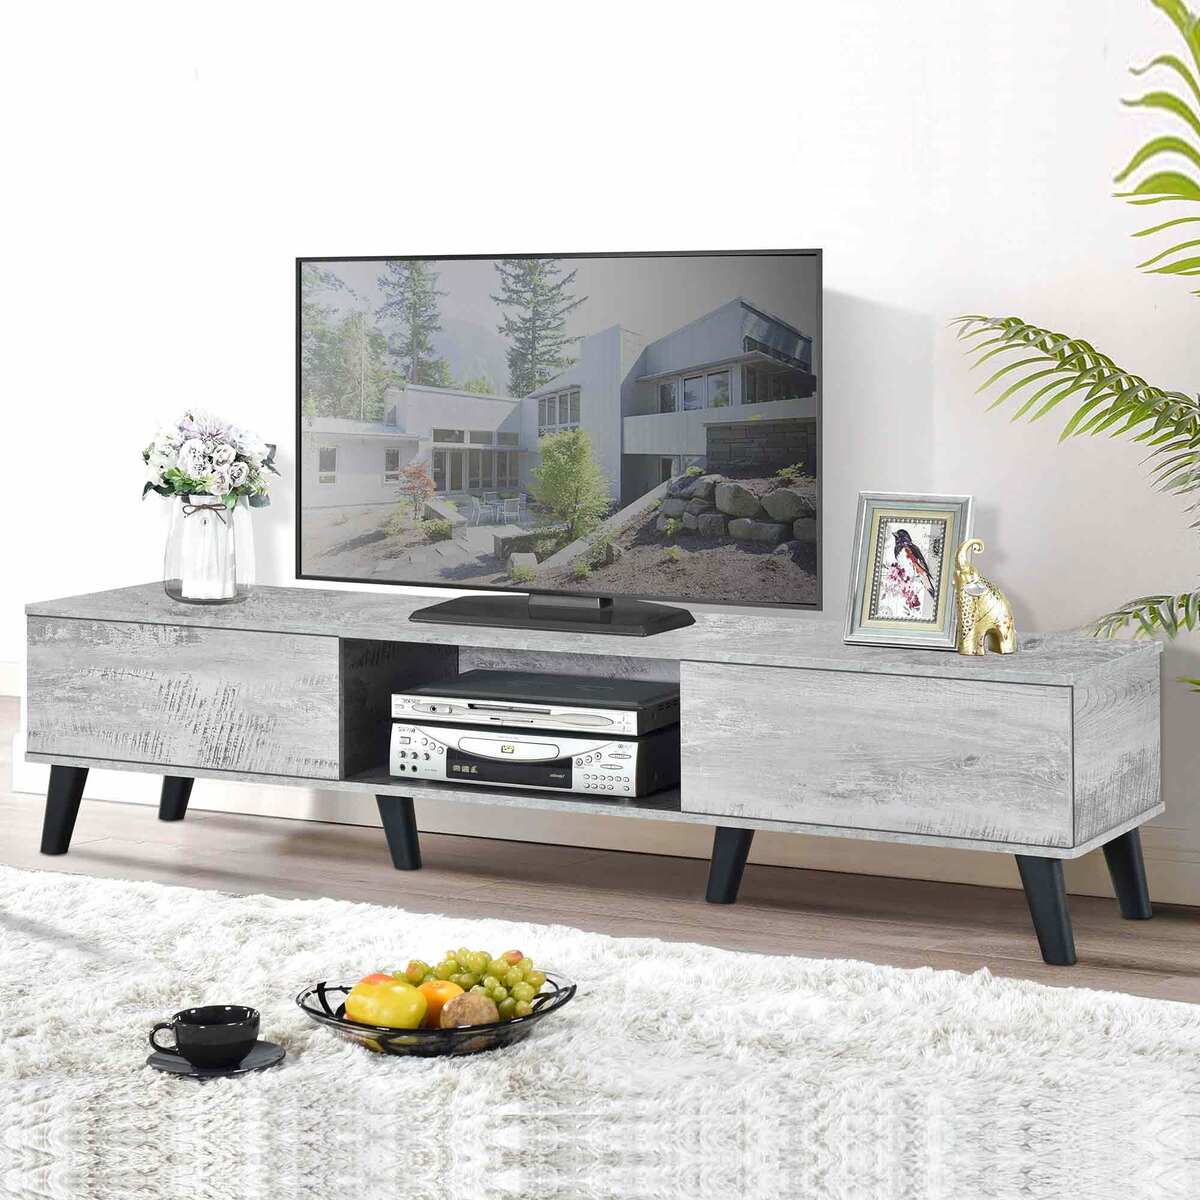 Maple Leaf  TV-Cabinet Wood 11570 Platinum  Size: 40x40x180 Cms(HxWxL) (Made In Malaysia)